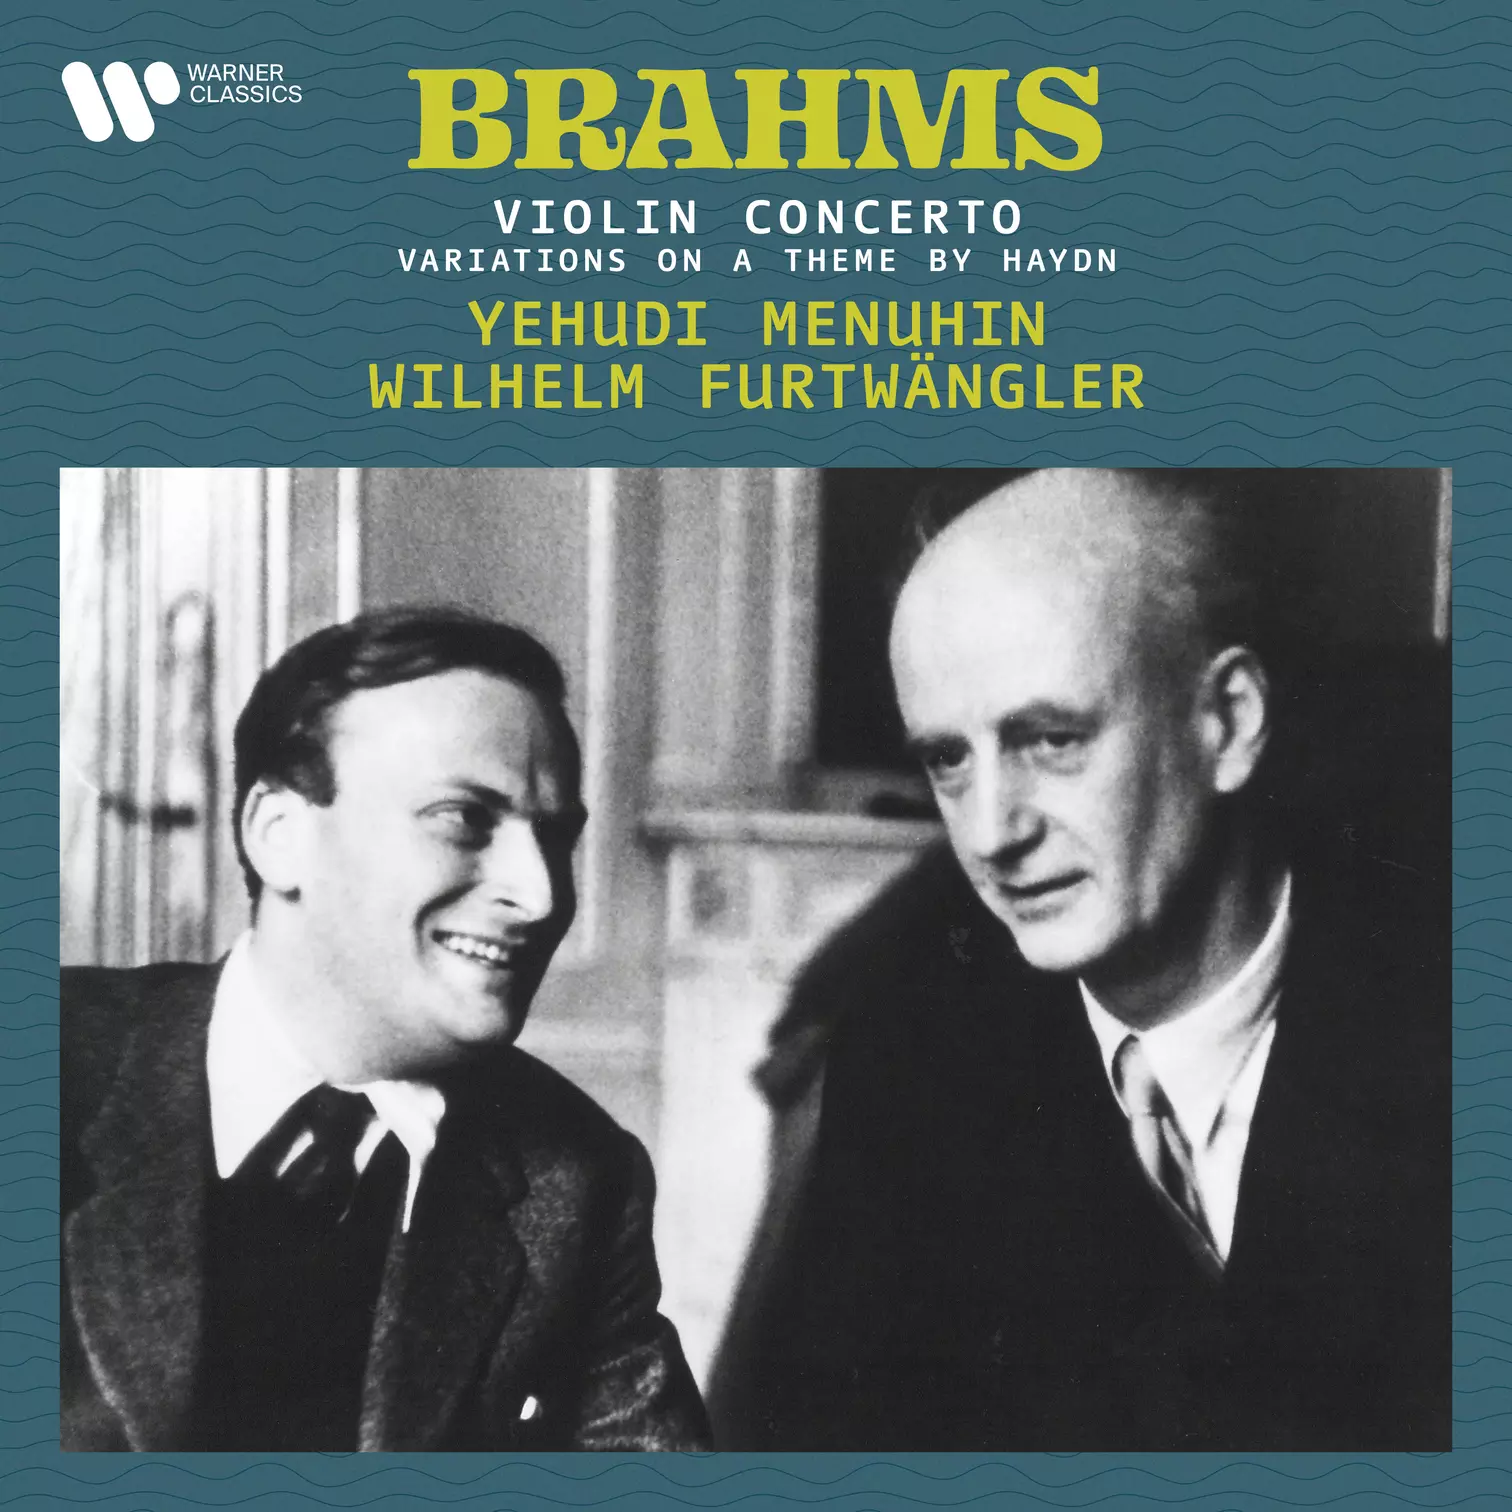 Brahms: Violin Concerto & Variations on a Theme by Haydn